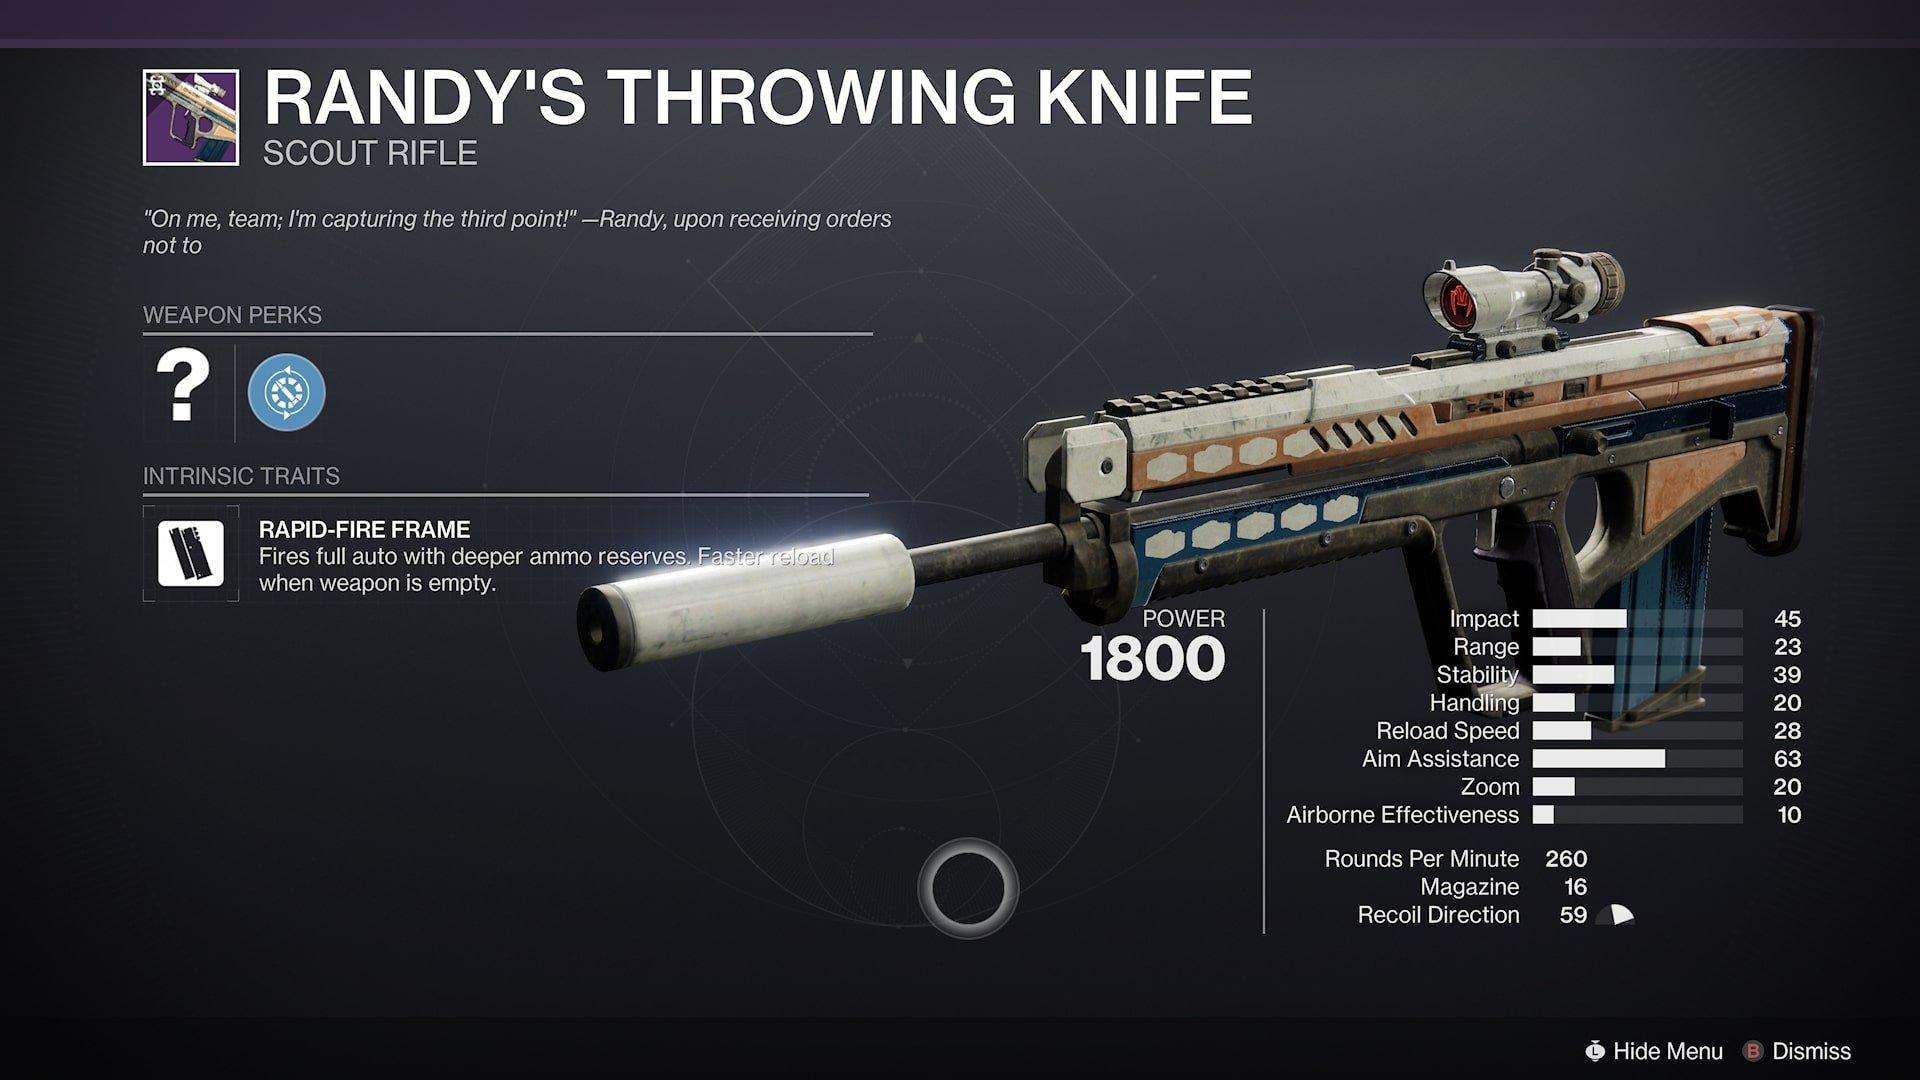 Randy's Throwing Knife Scout Rifle